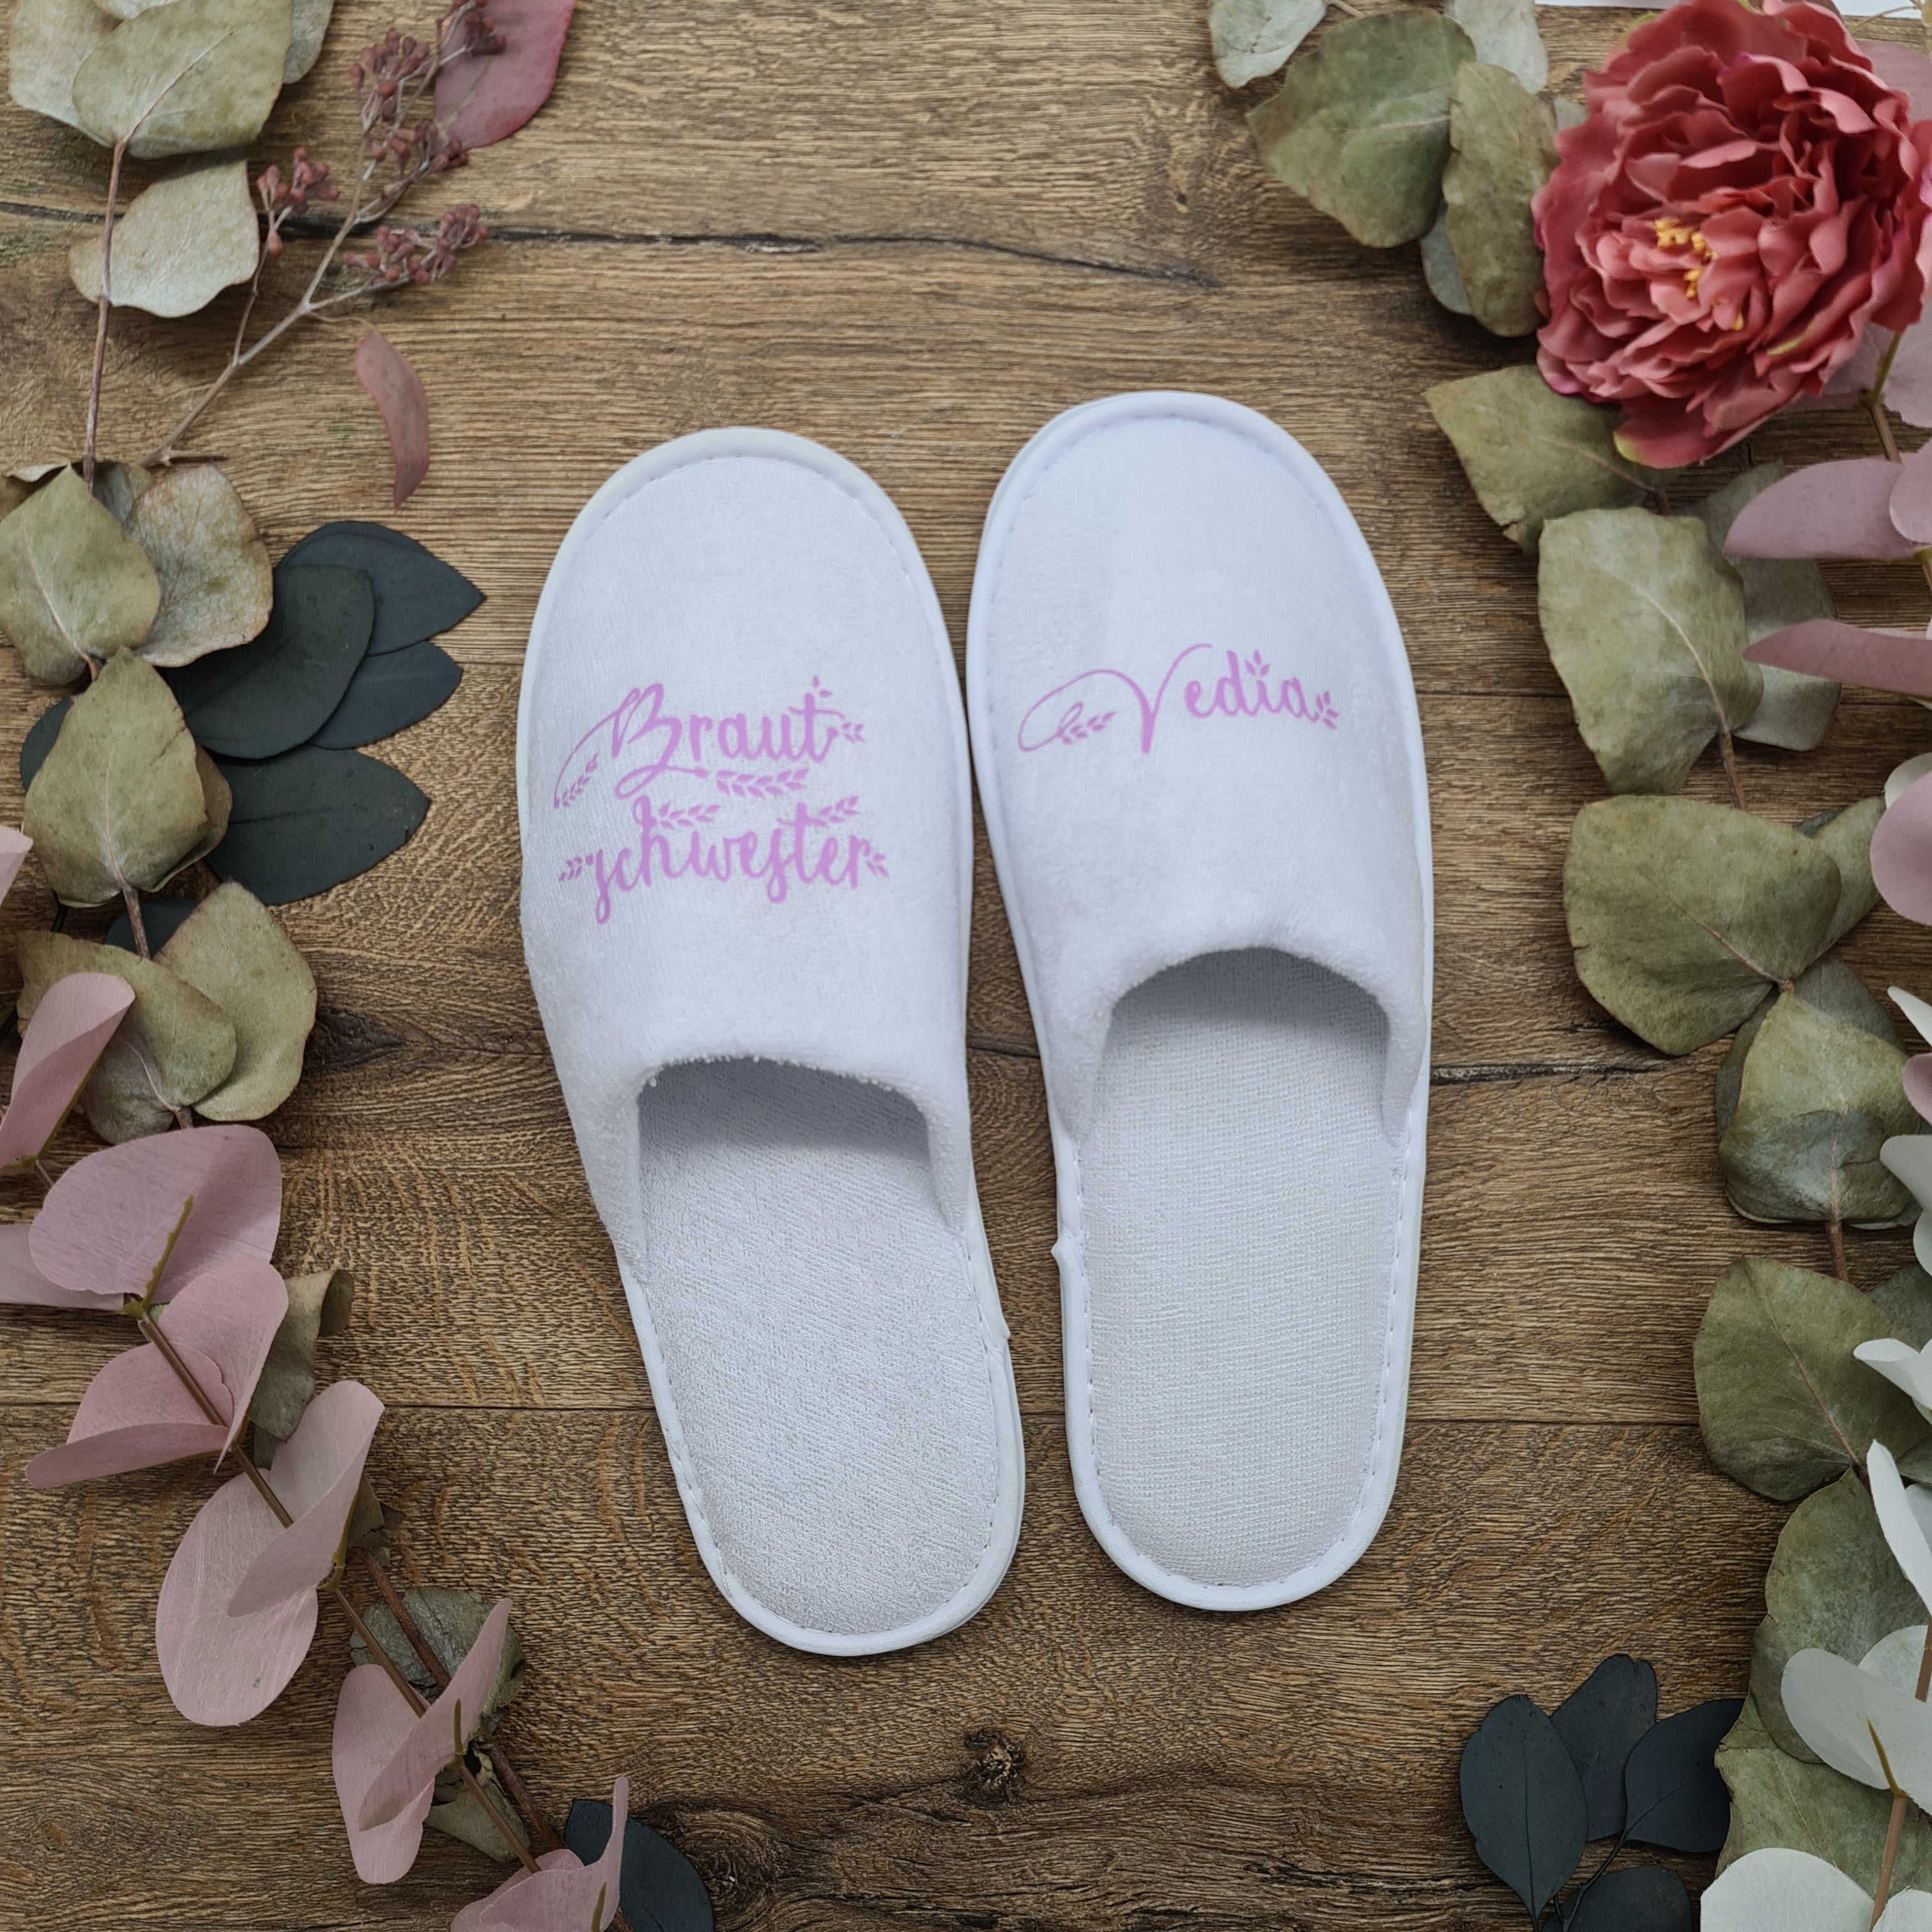 Fluffy Slippers for Wedding Day Photos, Maid of Honor Gift